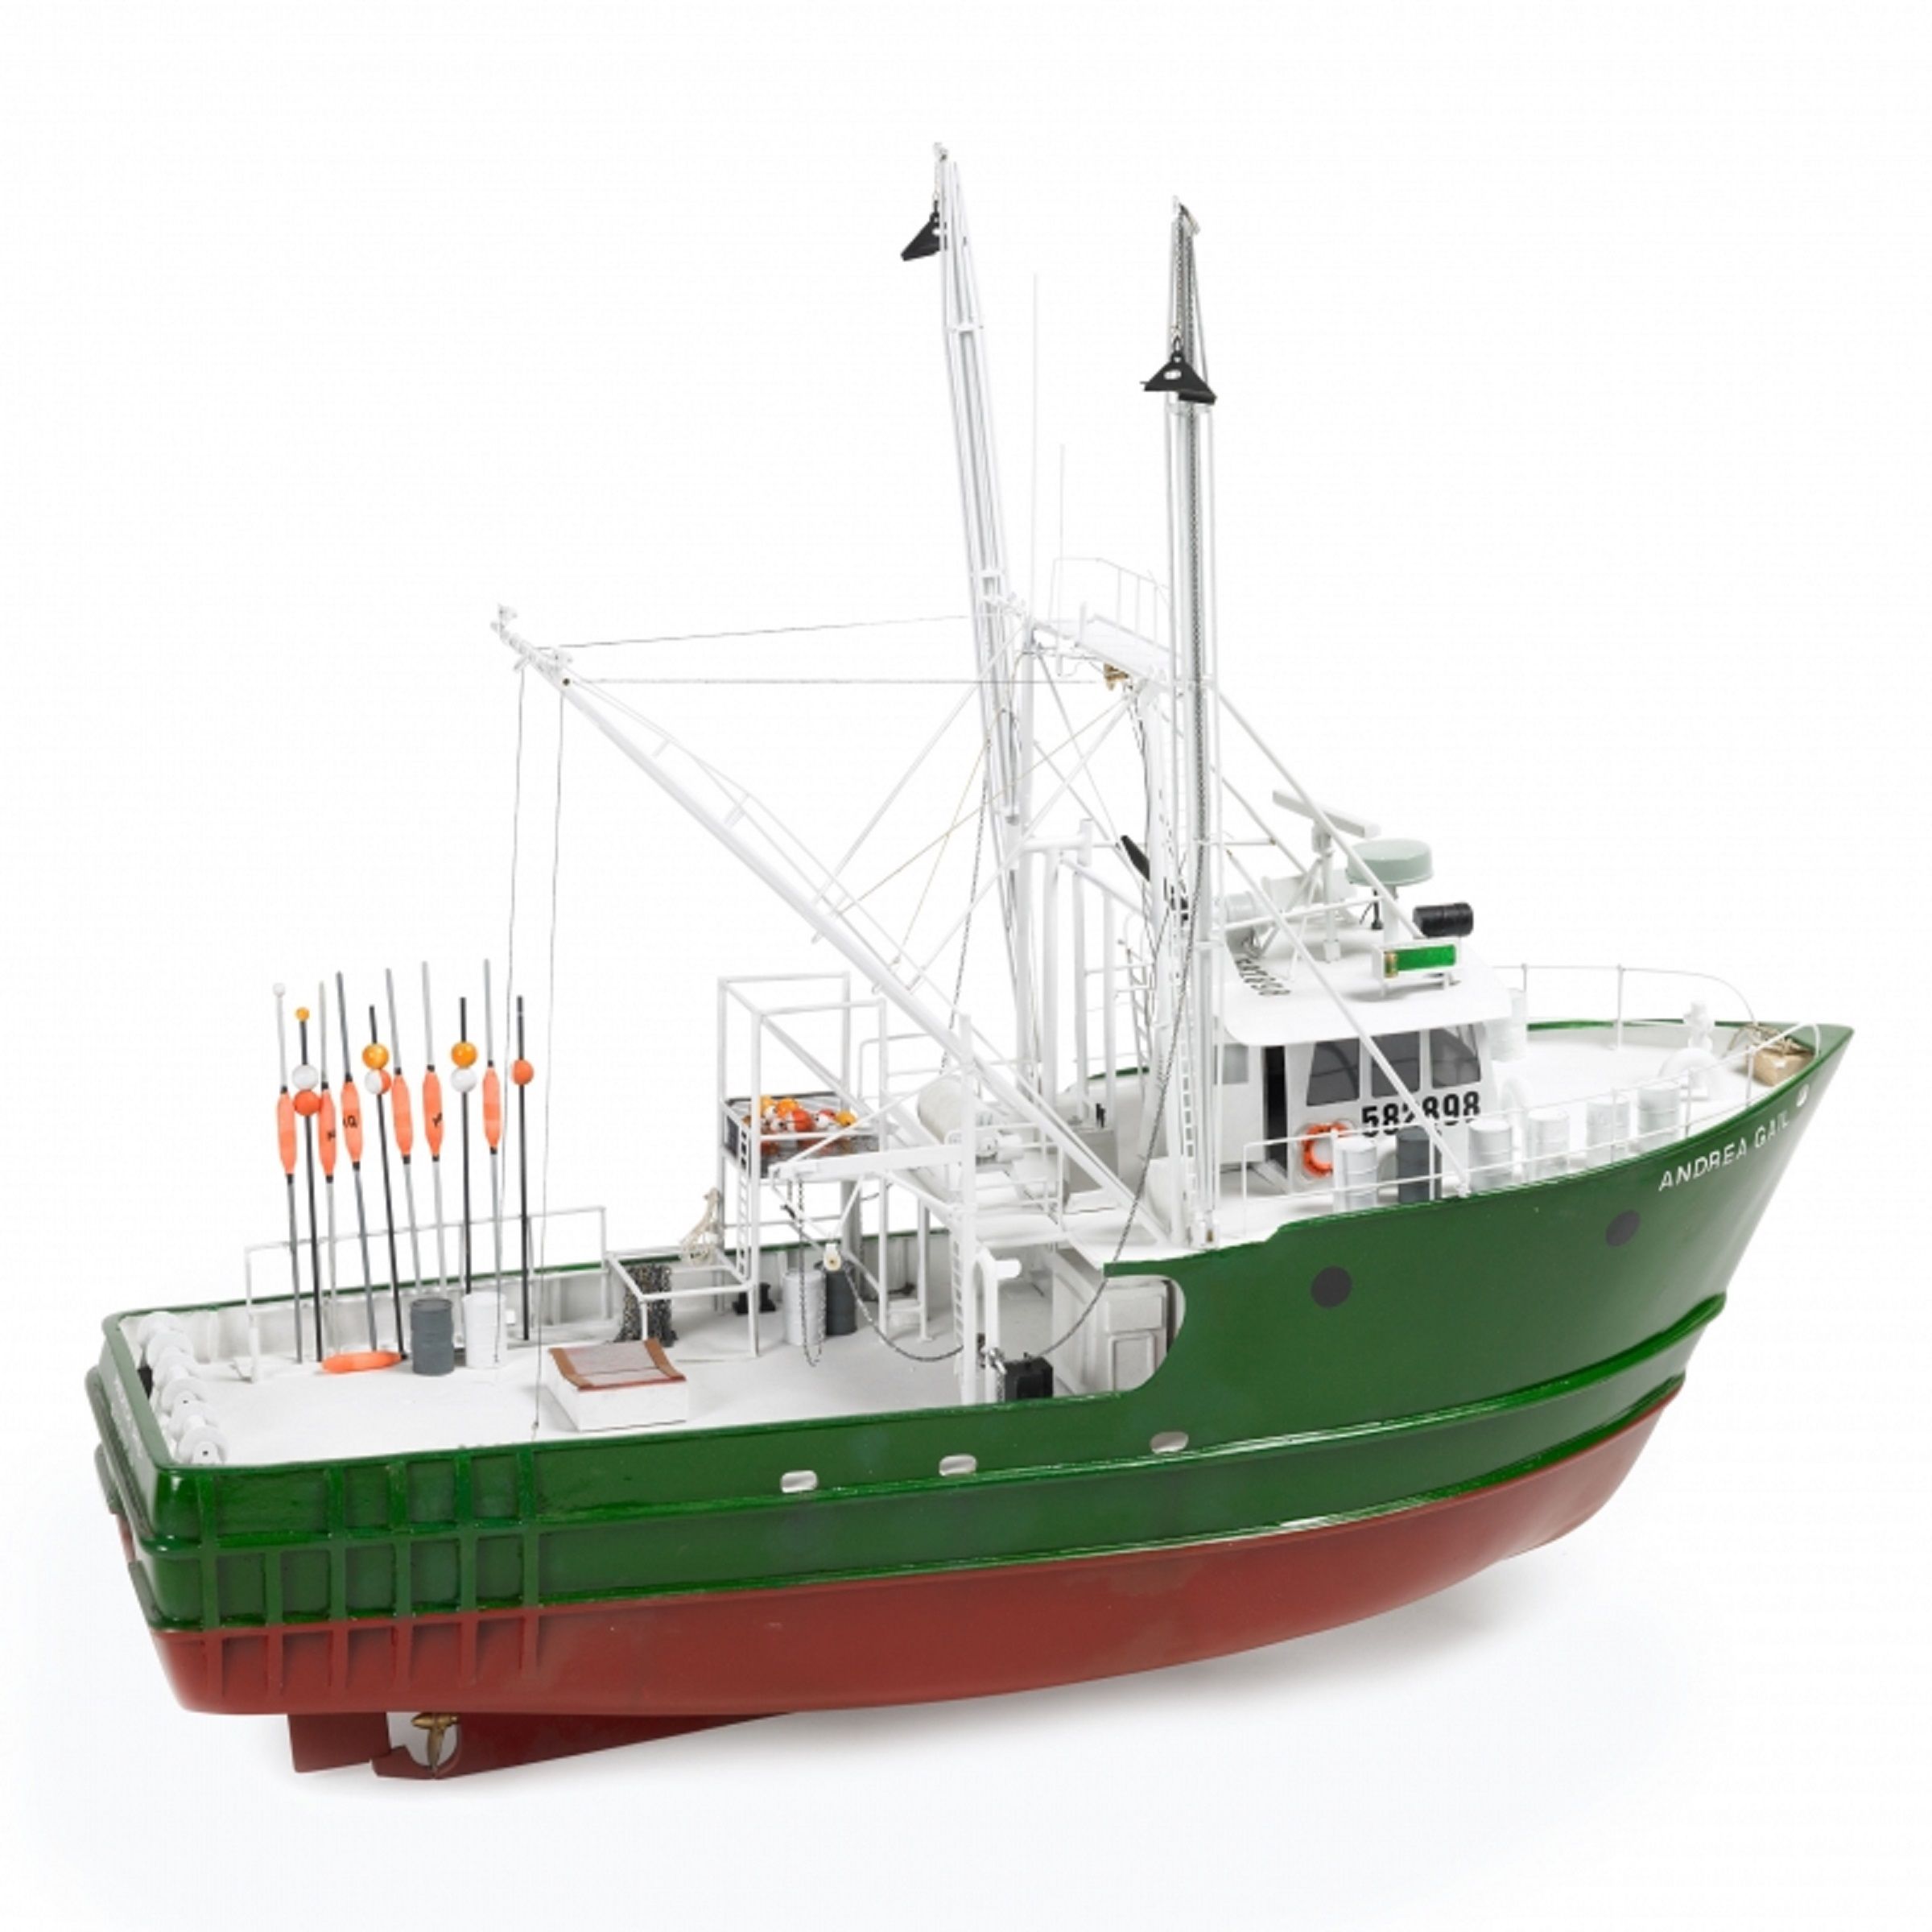 Andrea Gail Model Kit 1 to 60 Scale - Billing Boats (B608)